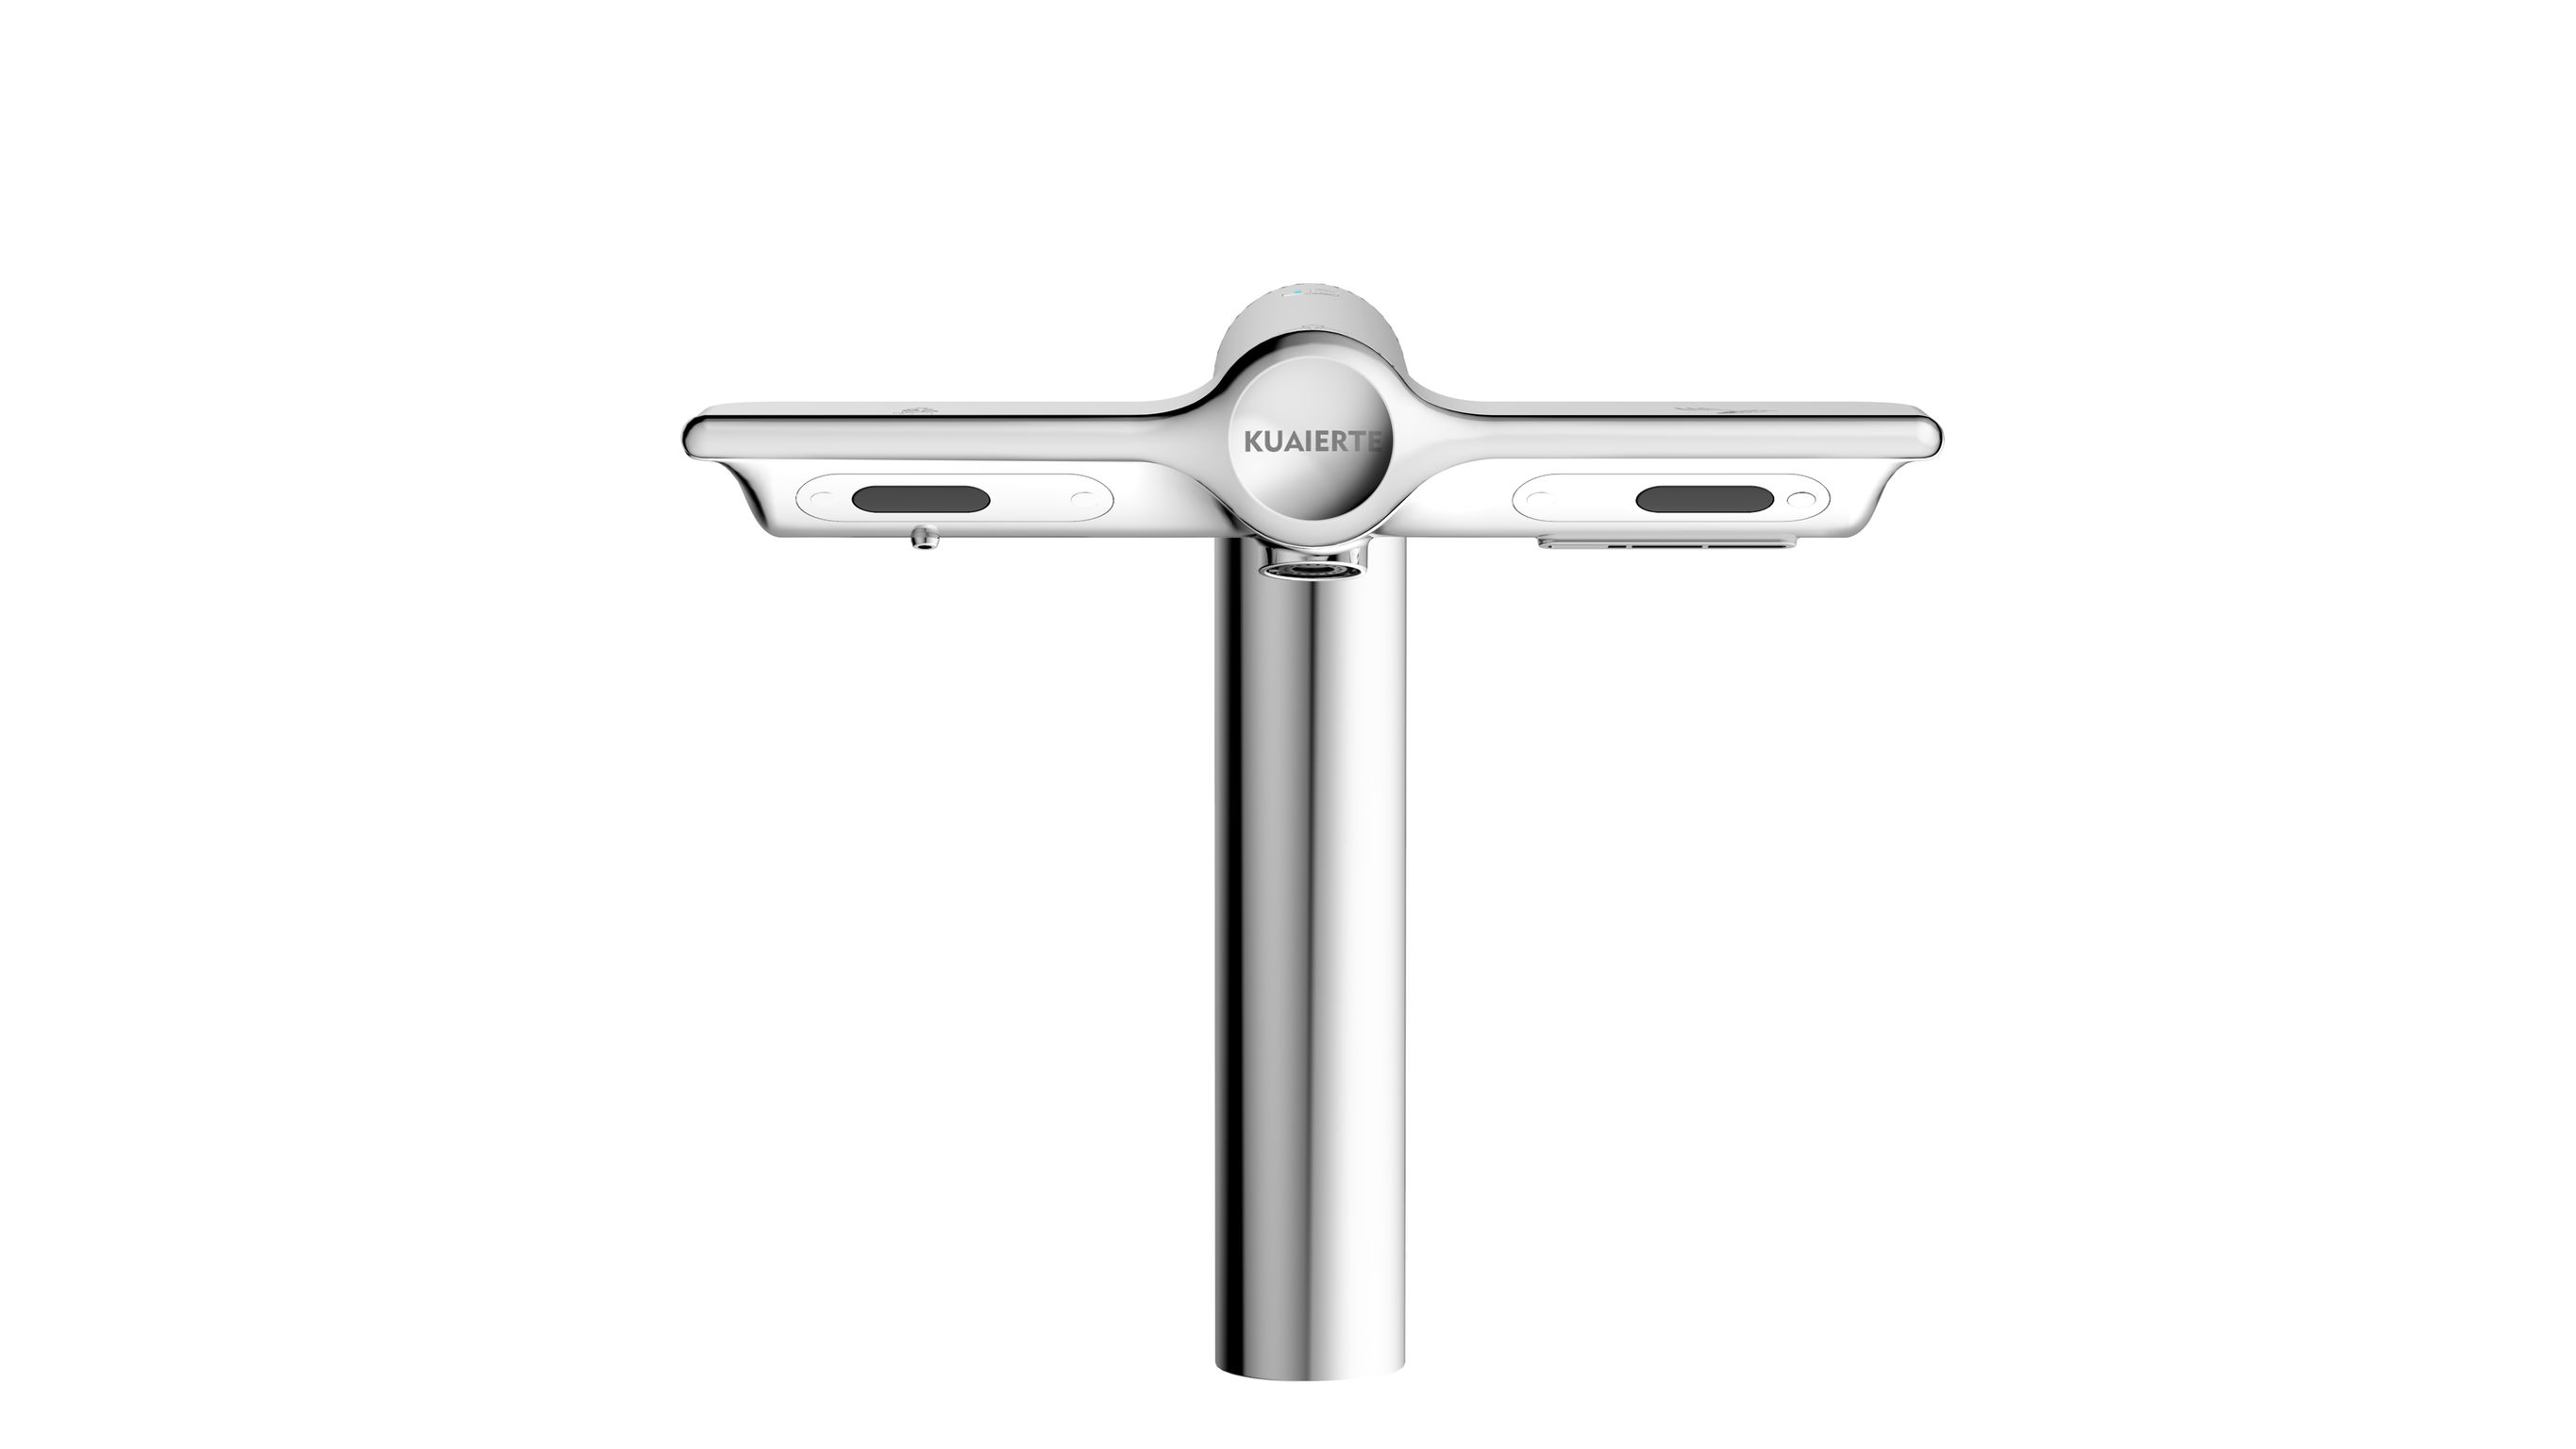 WING Faucet hand dryer